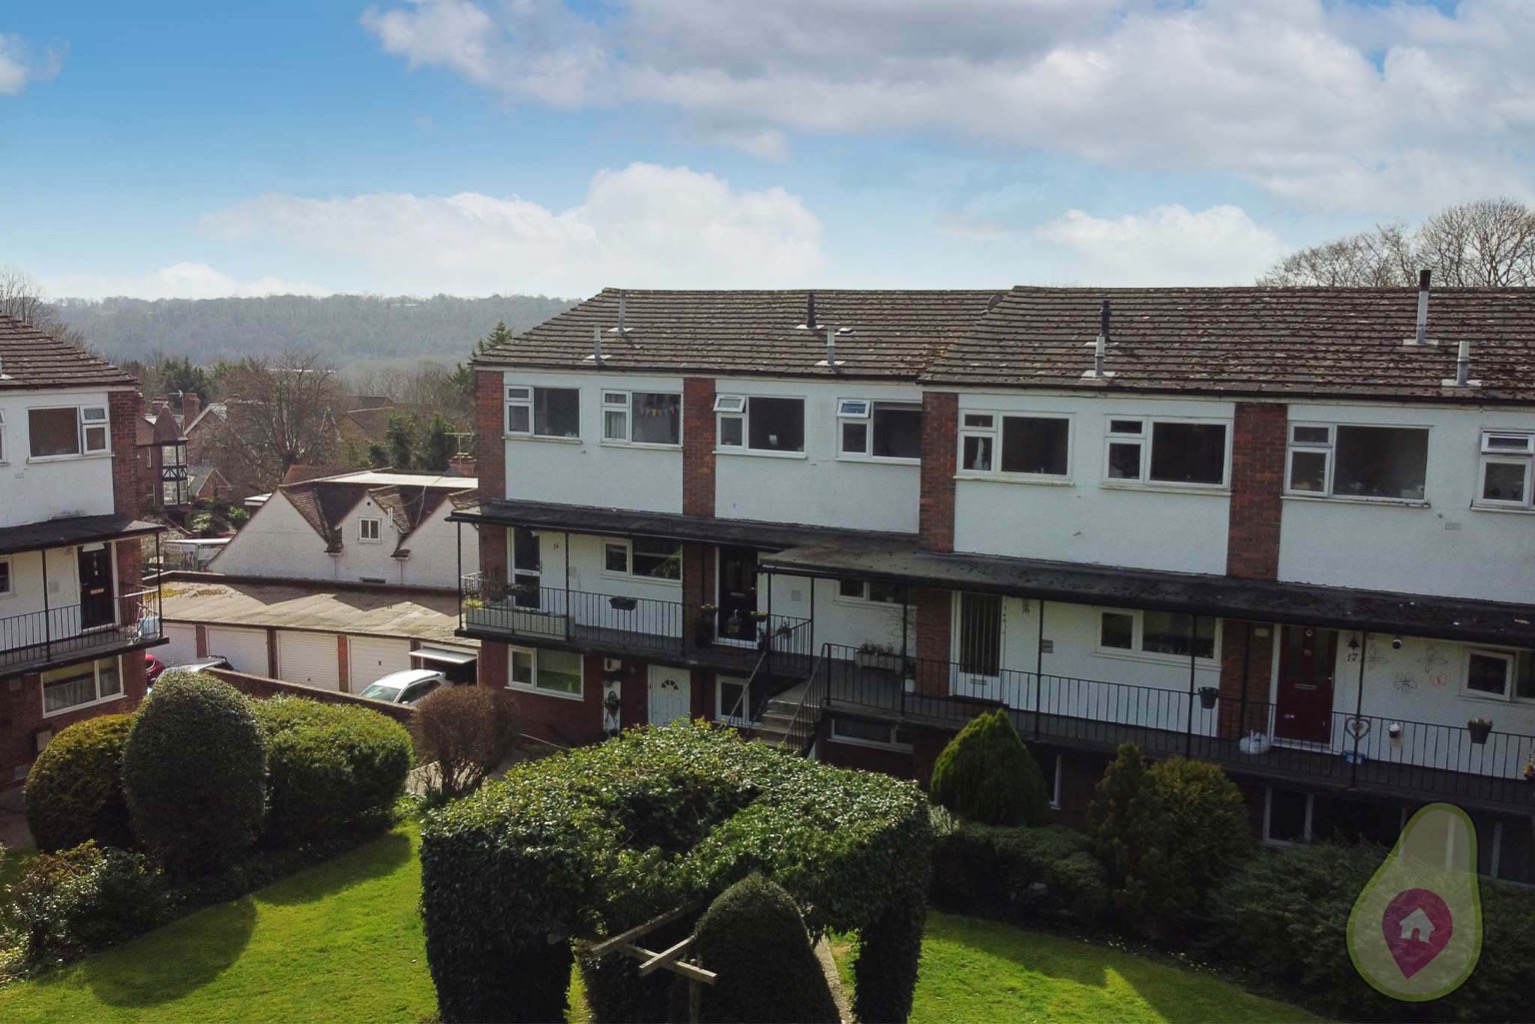 **Check Out The Property Video** This is a very well presented two bedroom split level maisonette that is larger in size than the majority of houses in this price range.  With garage and parking the property is located very close to High Wycombe's town centre and train station.